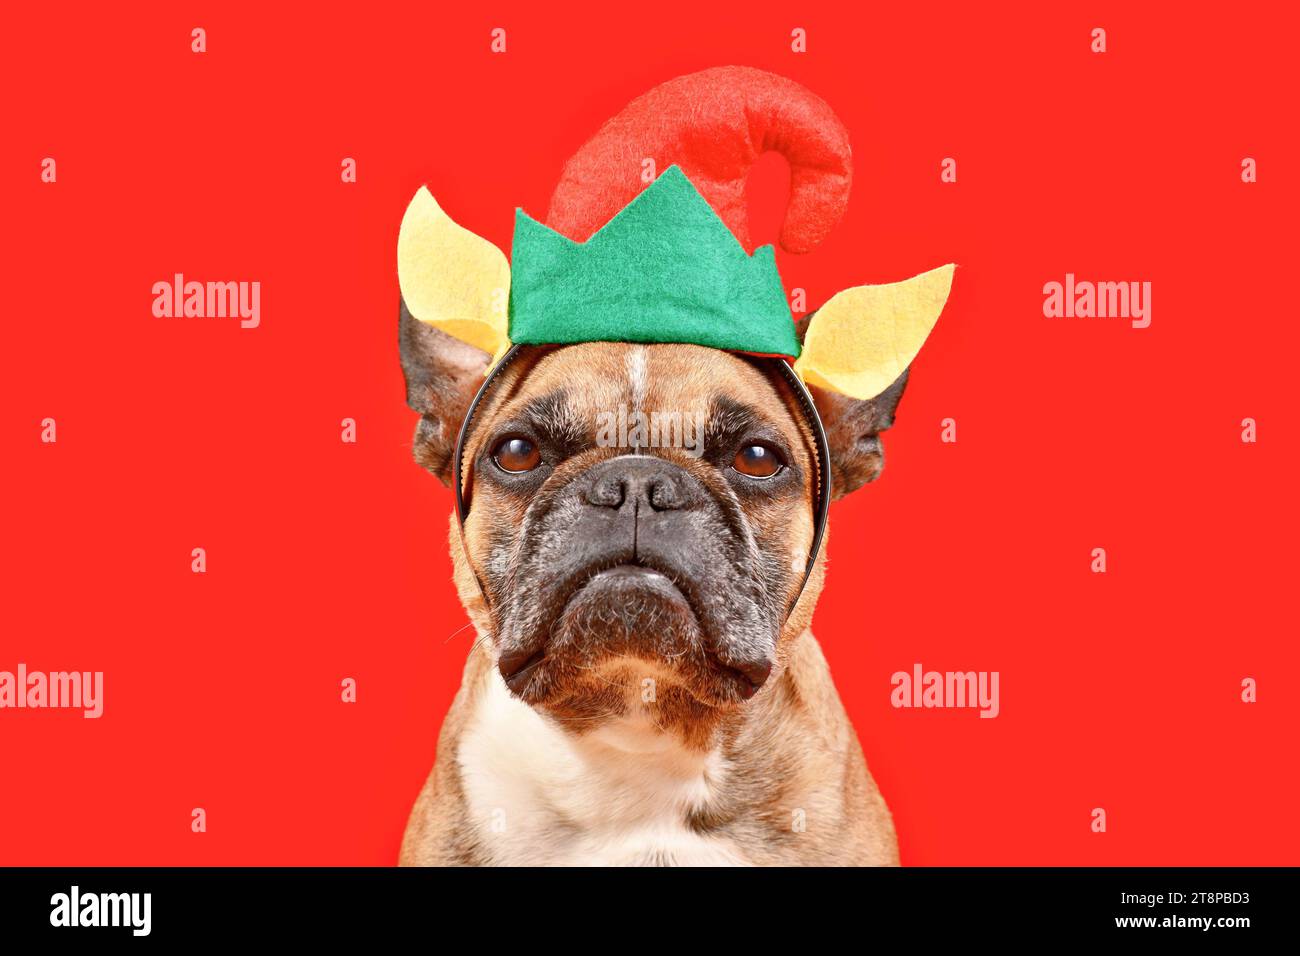 Funny French Bulldog dog wearing Christmas elf headband with hat and ears in front of red background Stock Photo